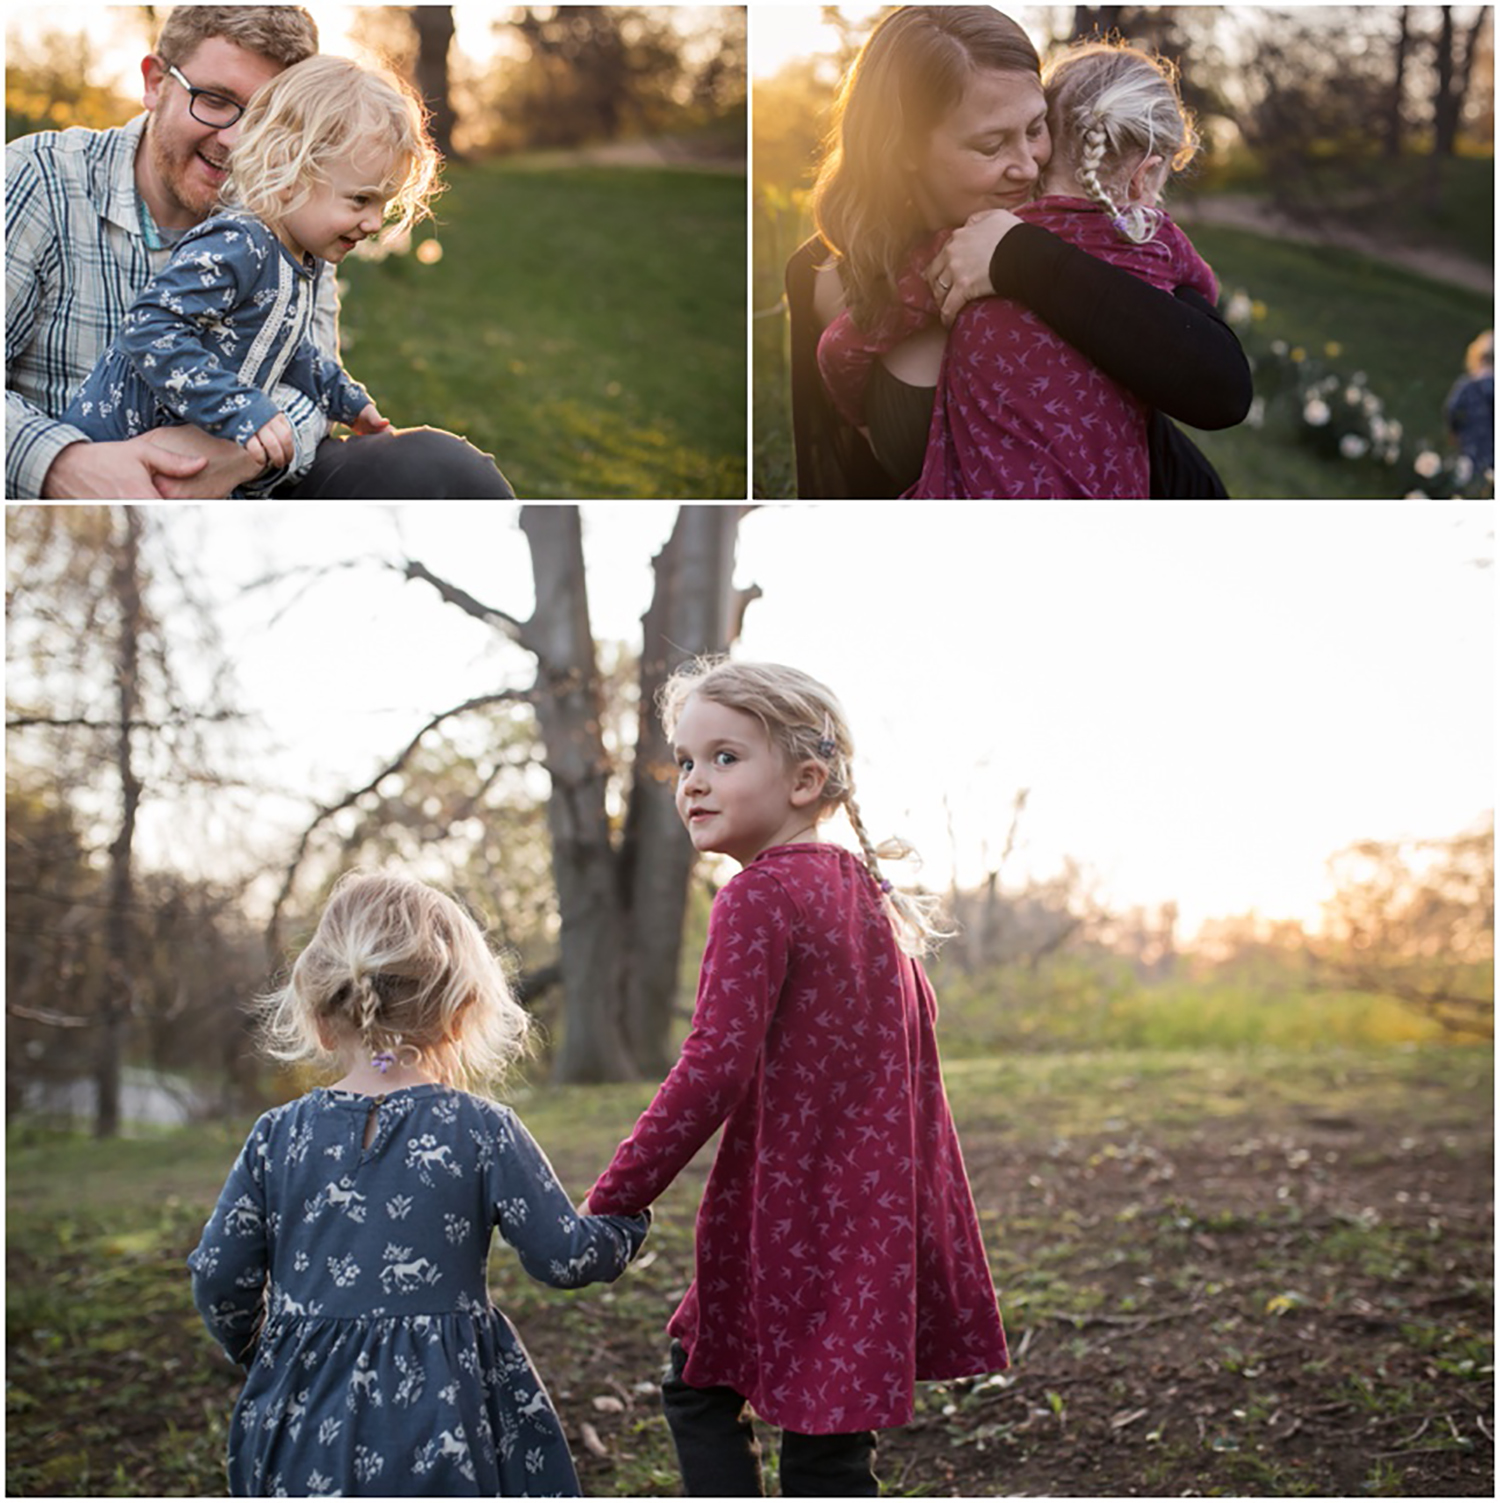 Rochester NY Family Photographer, family time together snuggling and walking